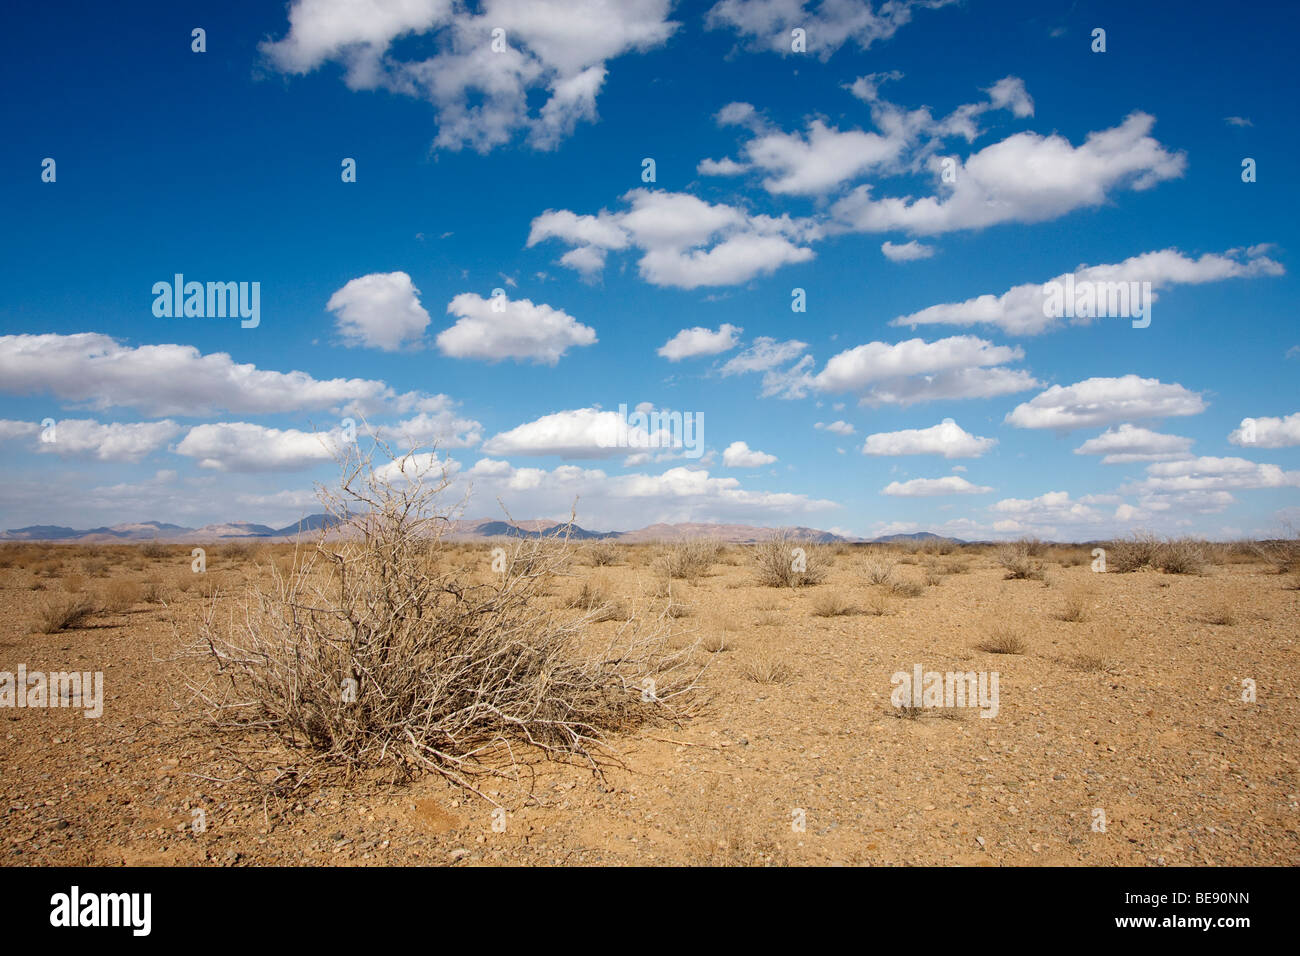 Clouds without rain over the dry arid plains in central Iran Stock Photo